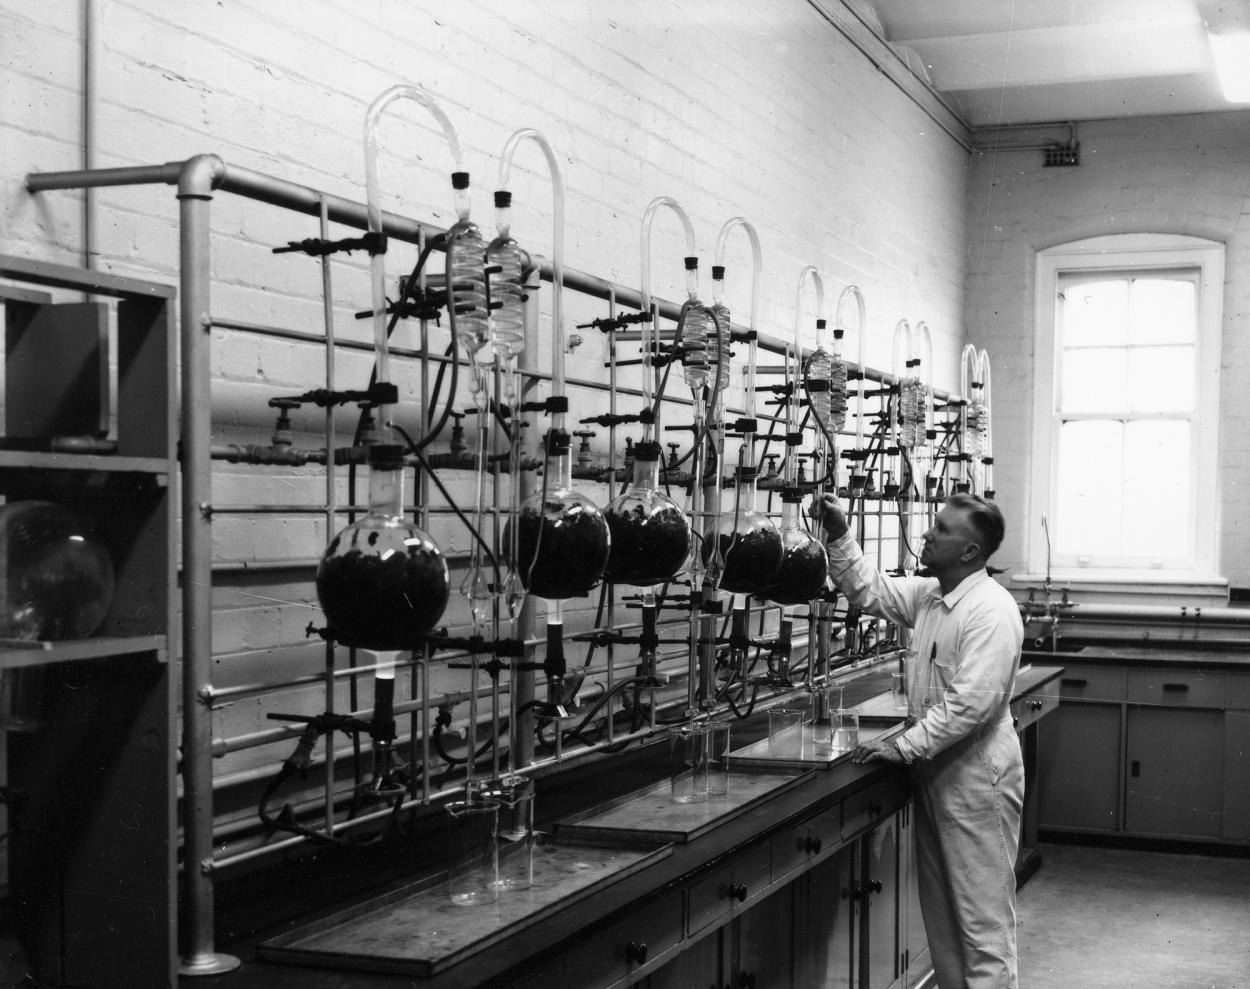 Black and white photographer of a main in a white lab coat studying botanical samples in glass scientific apparatus